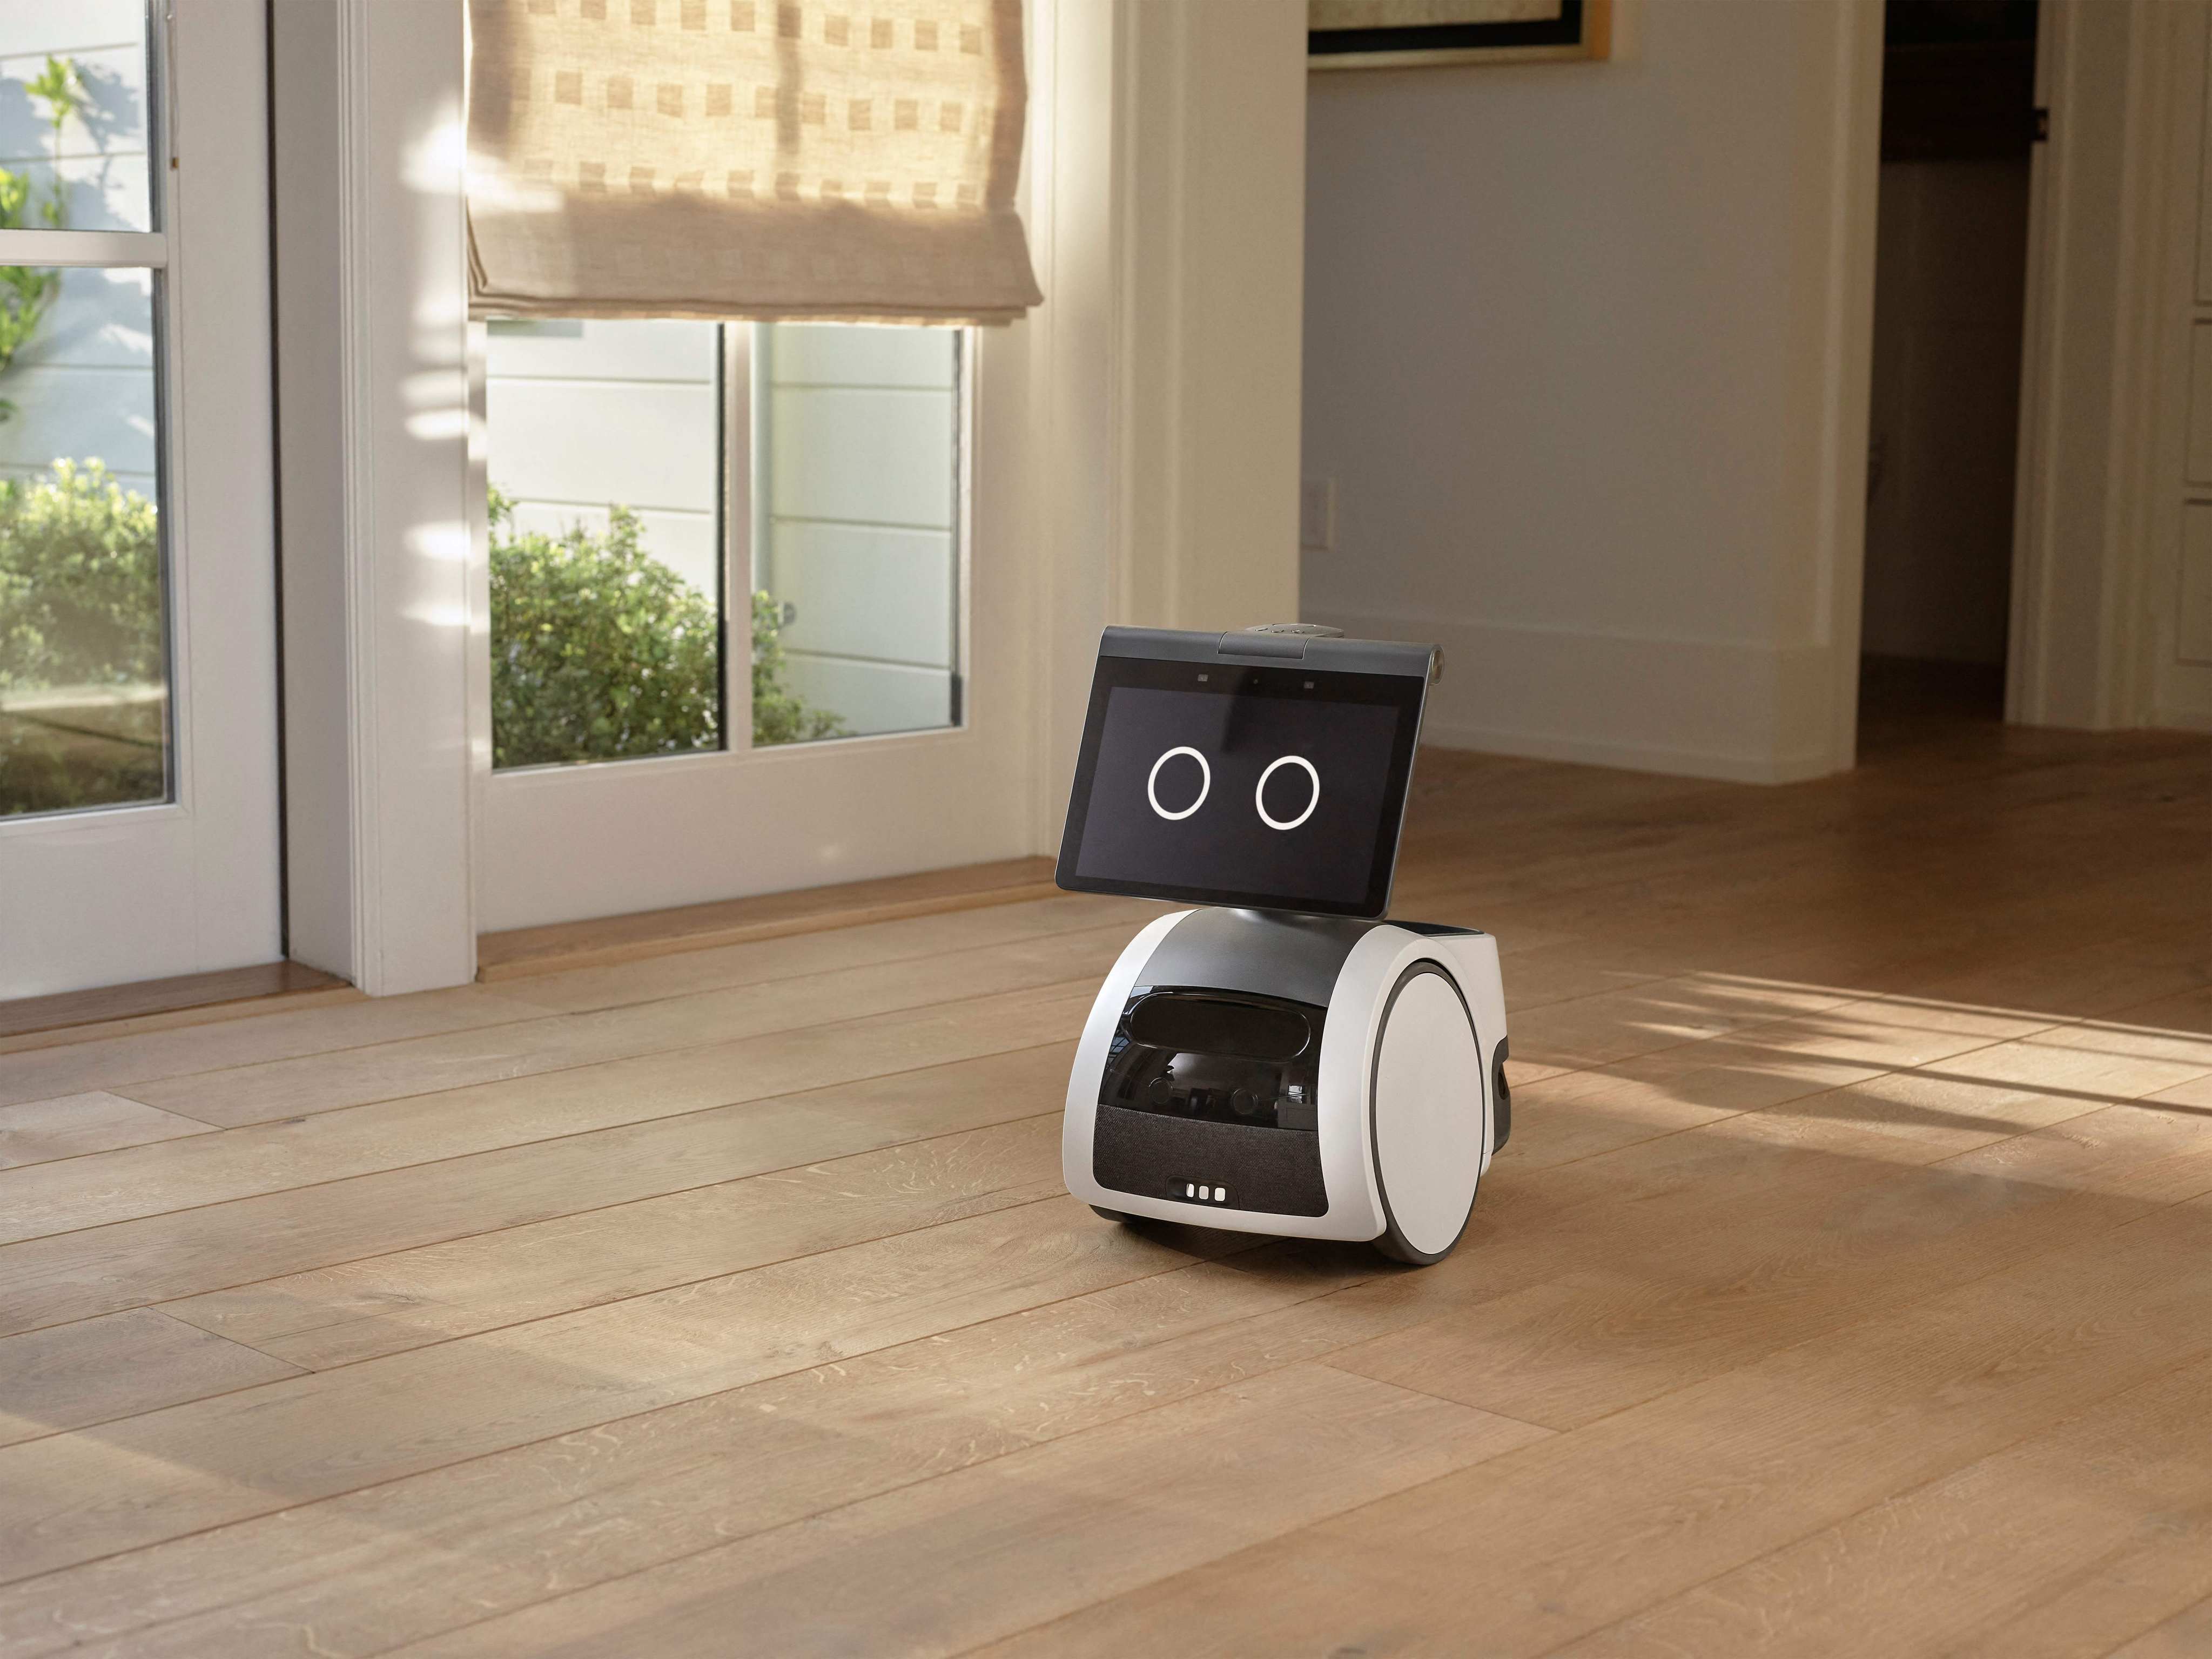 Astro, Amazon’s new US$1,000 home robot, is the size of a small dog and follows you around the house. Photo: AFP